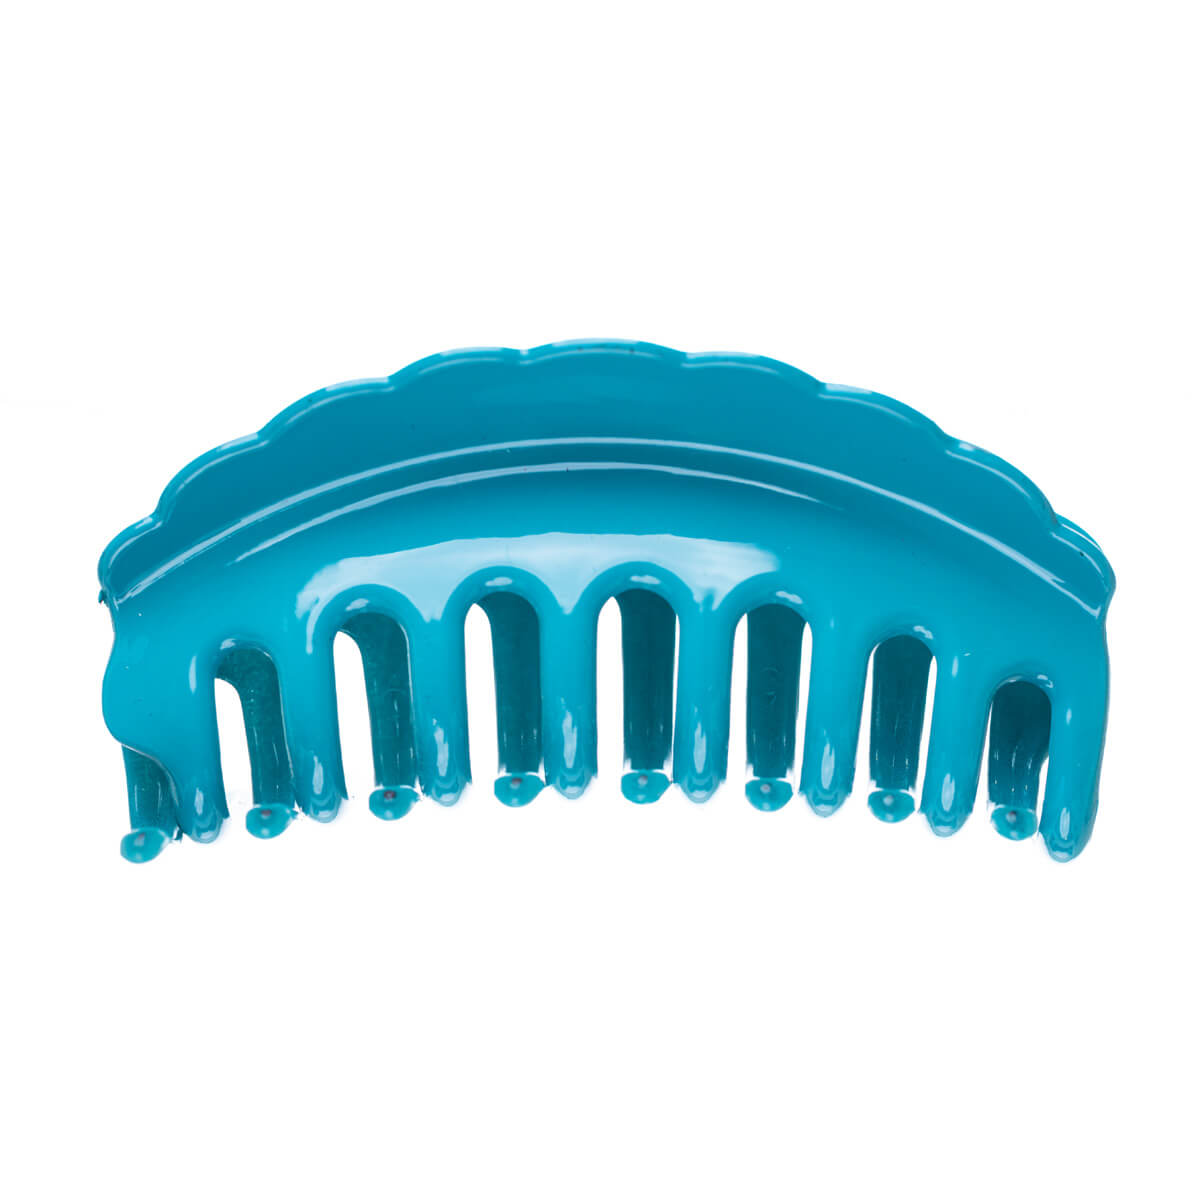 Hain Tooth STOR CURVED 10 cm